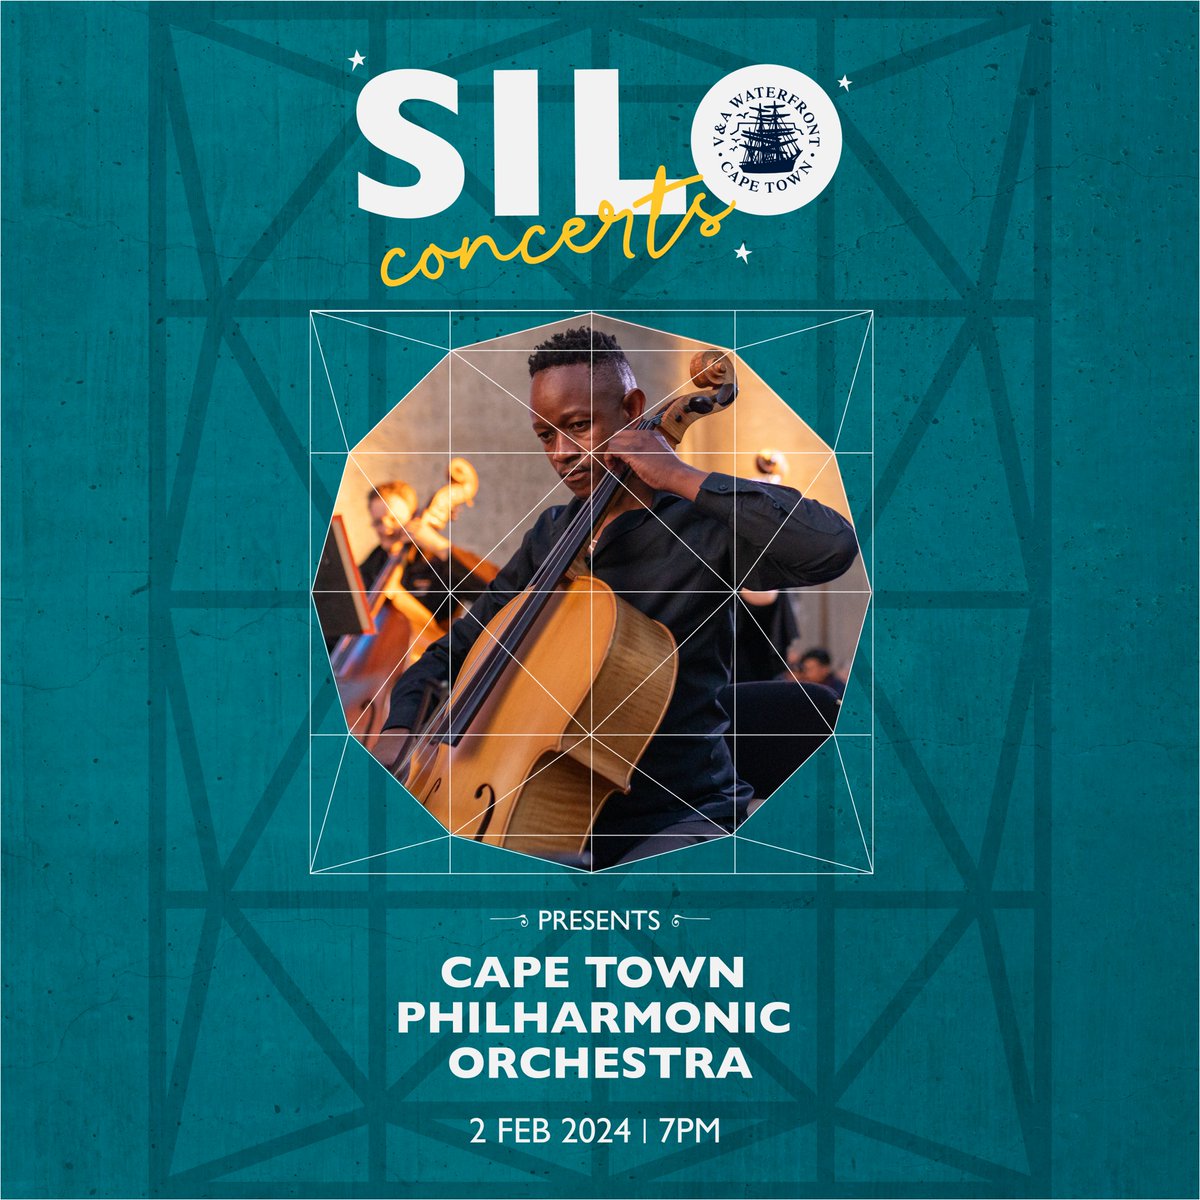 We've got your Friday plans covered with another incredible Silo concert performance. The Cape Town Philharmonic Orchestra will be taking the stage at 19:00 on Friday, February 2nd, in the Silo District as part of this year's Silo Concerts series. You won't want to miss out!